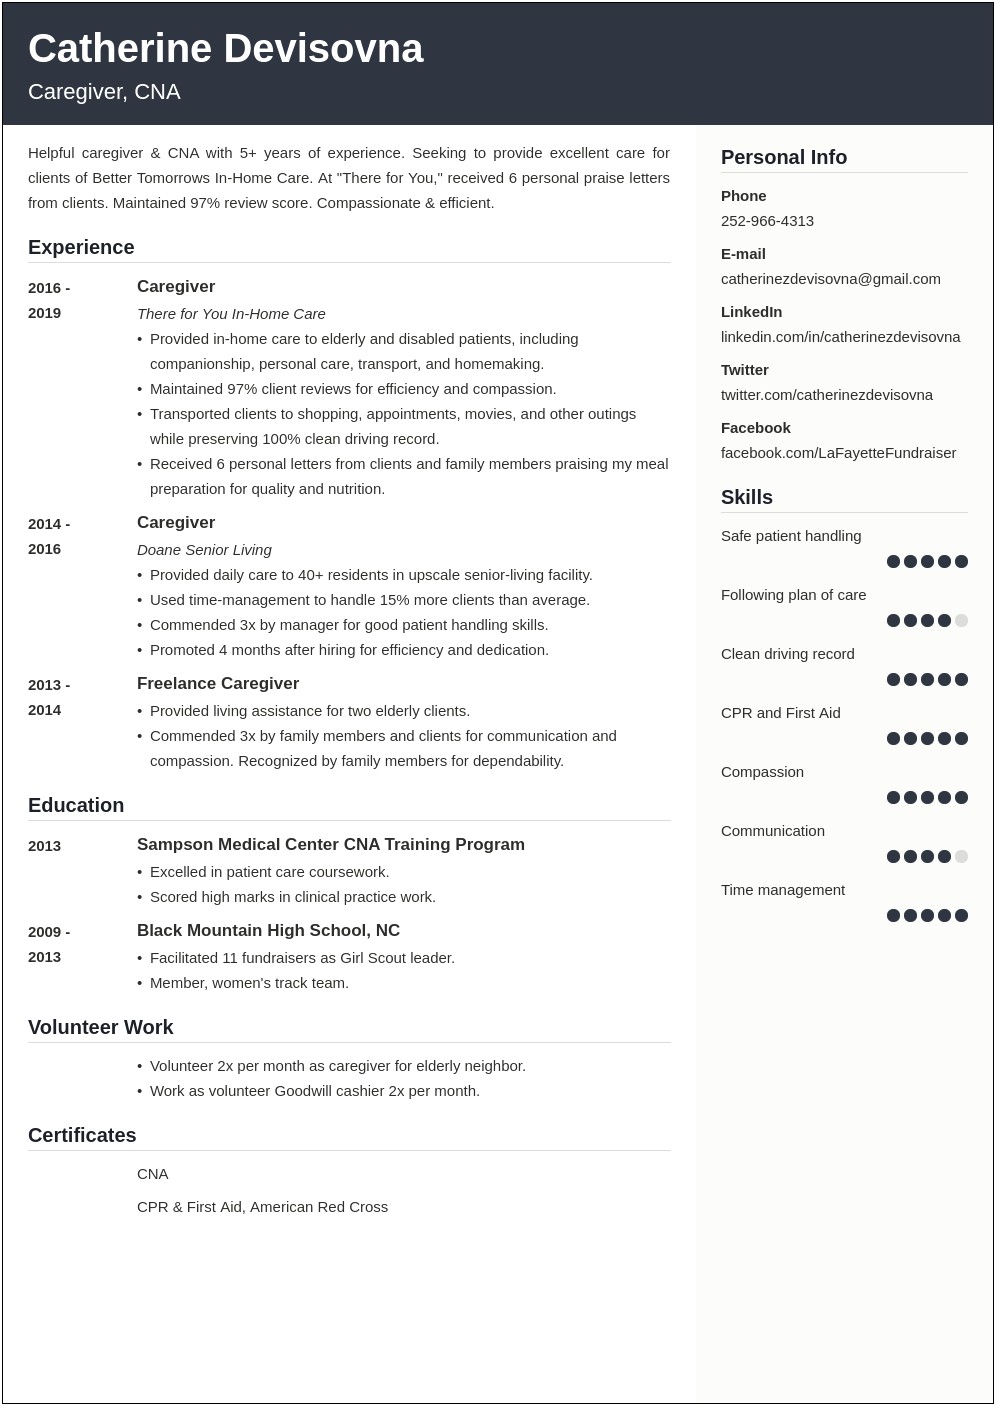 Skills For Caregiver Job Experience On Resume